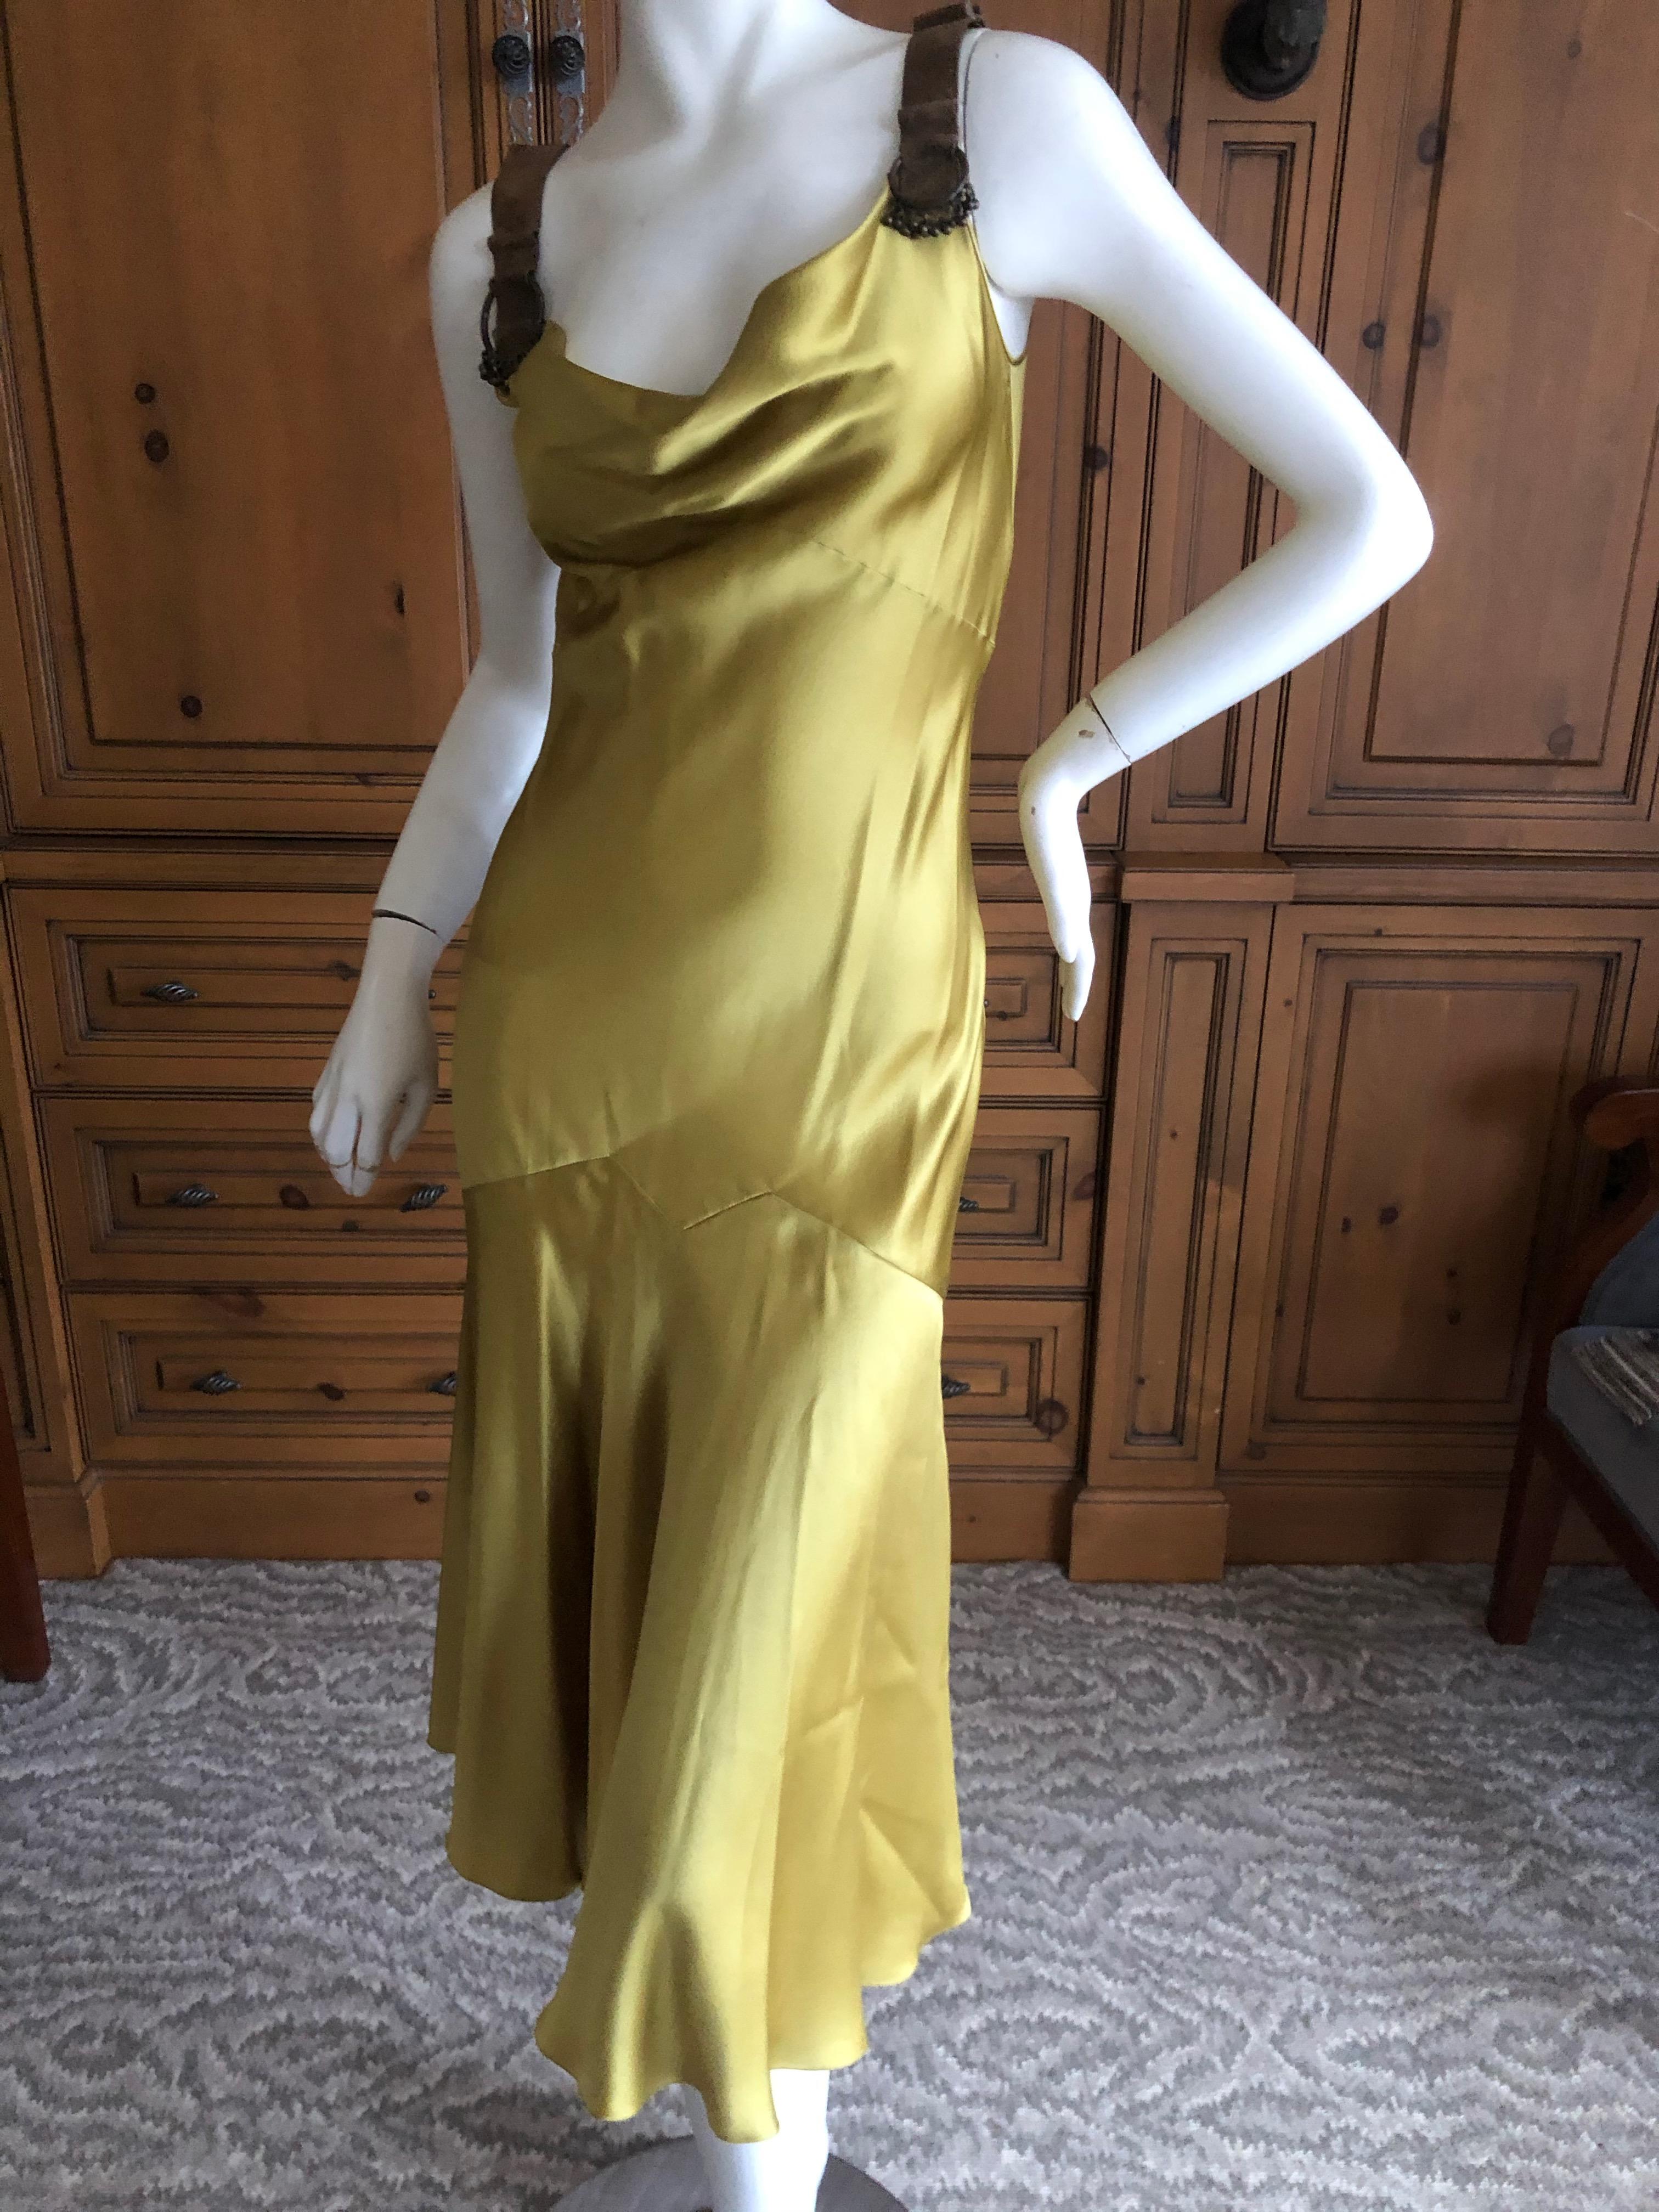 John Galliano Chartreuse Silk Charmeuse Cocktail Dress with Leather Straps.
So pretty, with leather shoulder straps with beaded ornament's.
 Size 38
 Bust 38